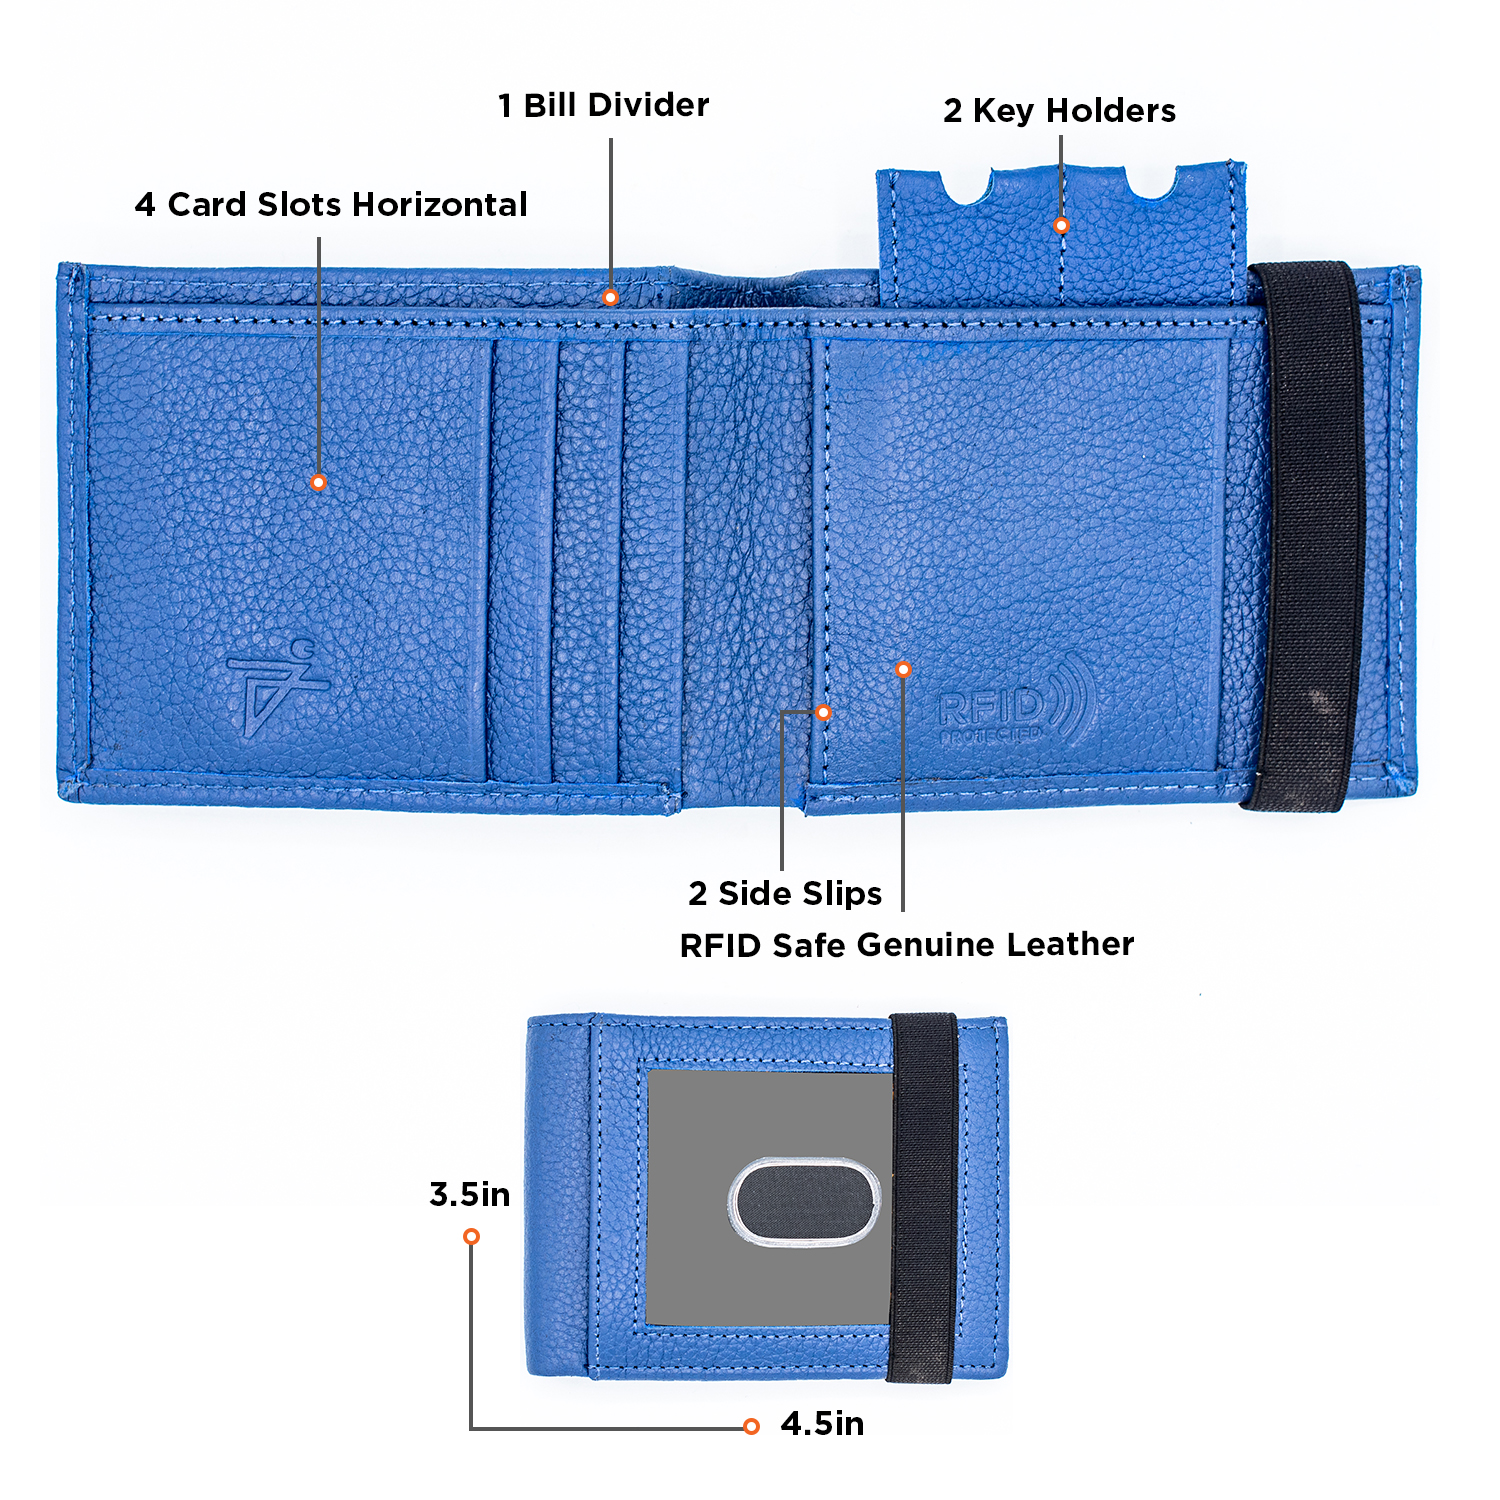 RFID Safe Biker Men's Soft Leather Bifold Chain Wallet with Elastic Card Case Navy - image 2 of 5